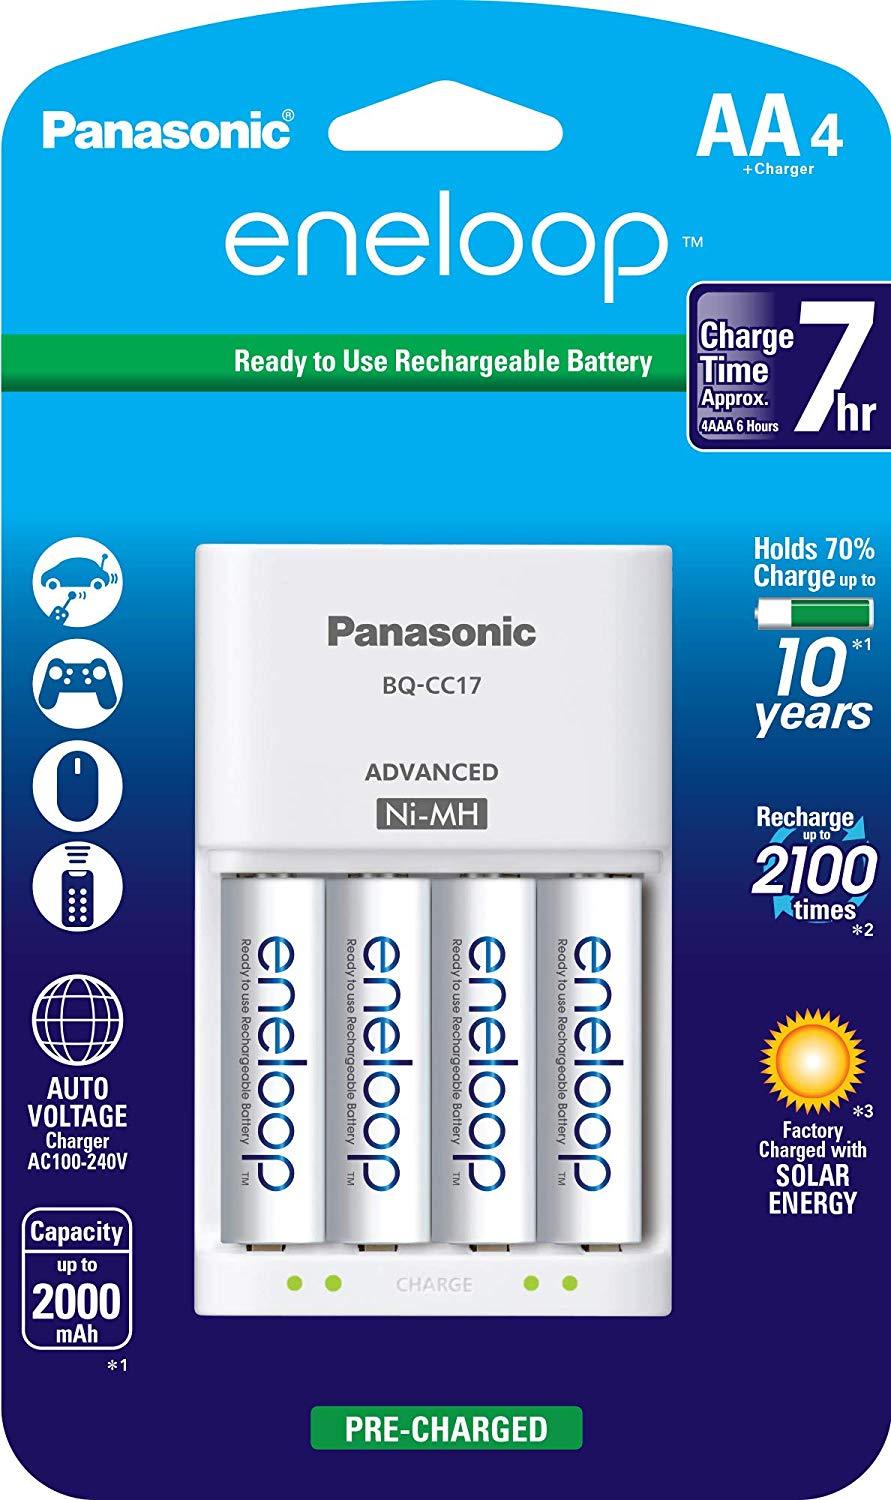 Primary image for Panasonic Eneloop Individual Cell Battery Charger Pack w/ (4) AA Batteries